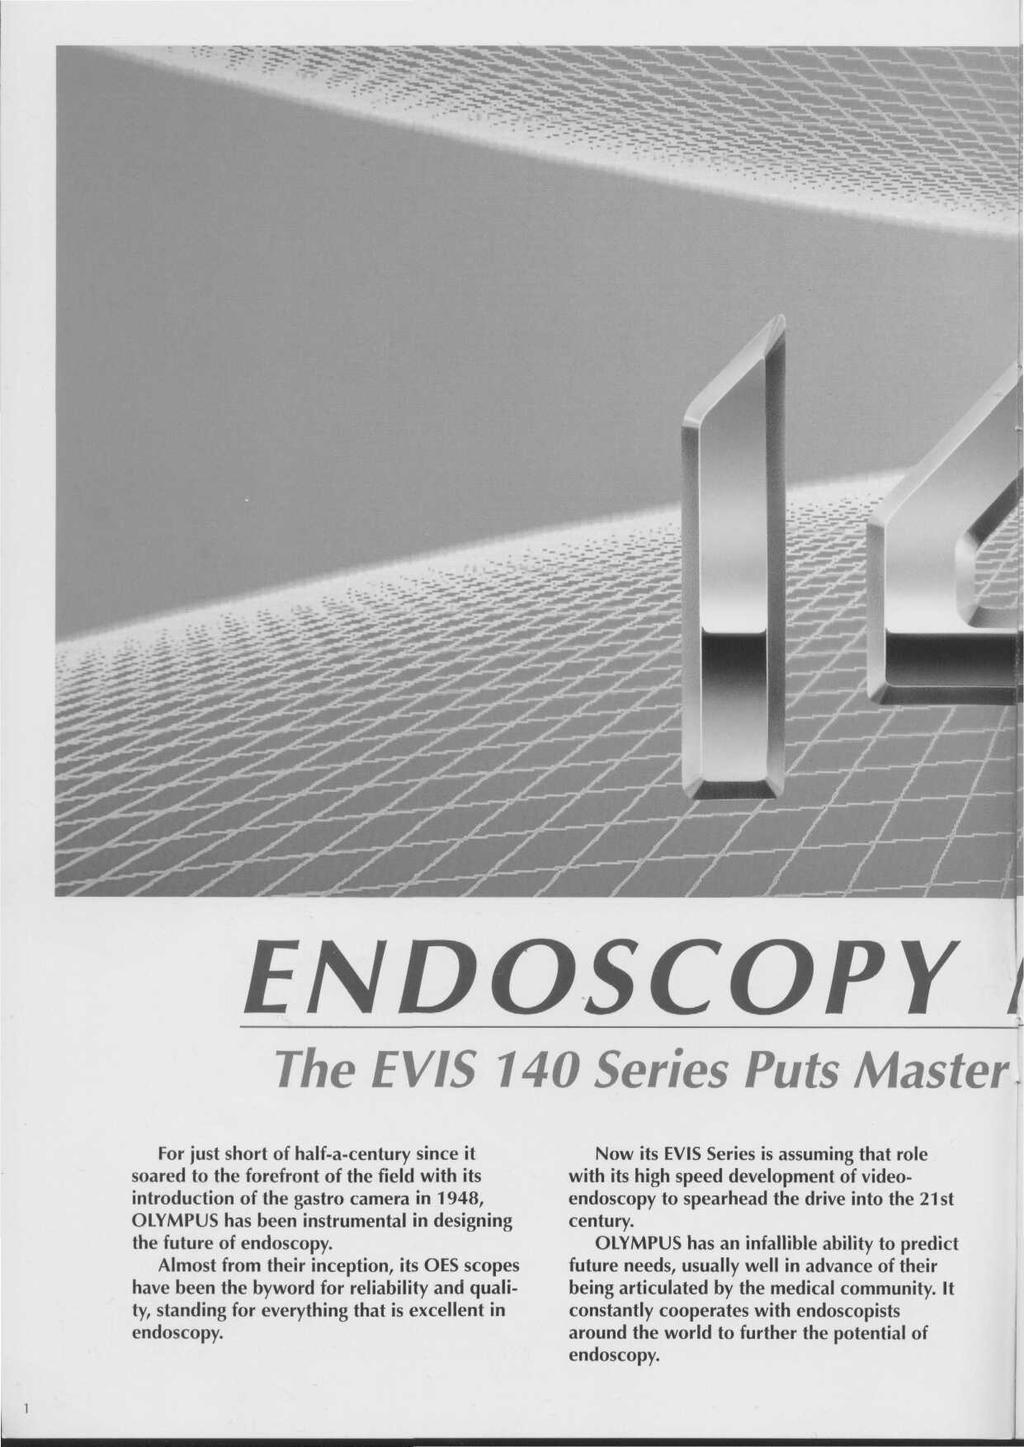 ENDOSCOPY I The EVIS 140 Series Puts Master For just short of halfacentury since it soared to the forefront of the field with its introduction of the gastro camera in 1948, OLYMPUS has been